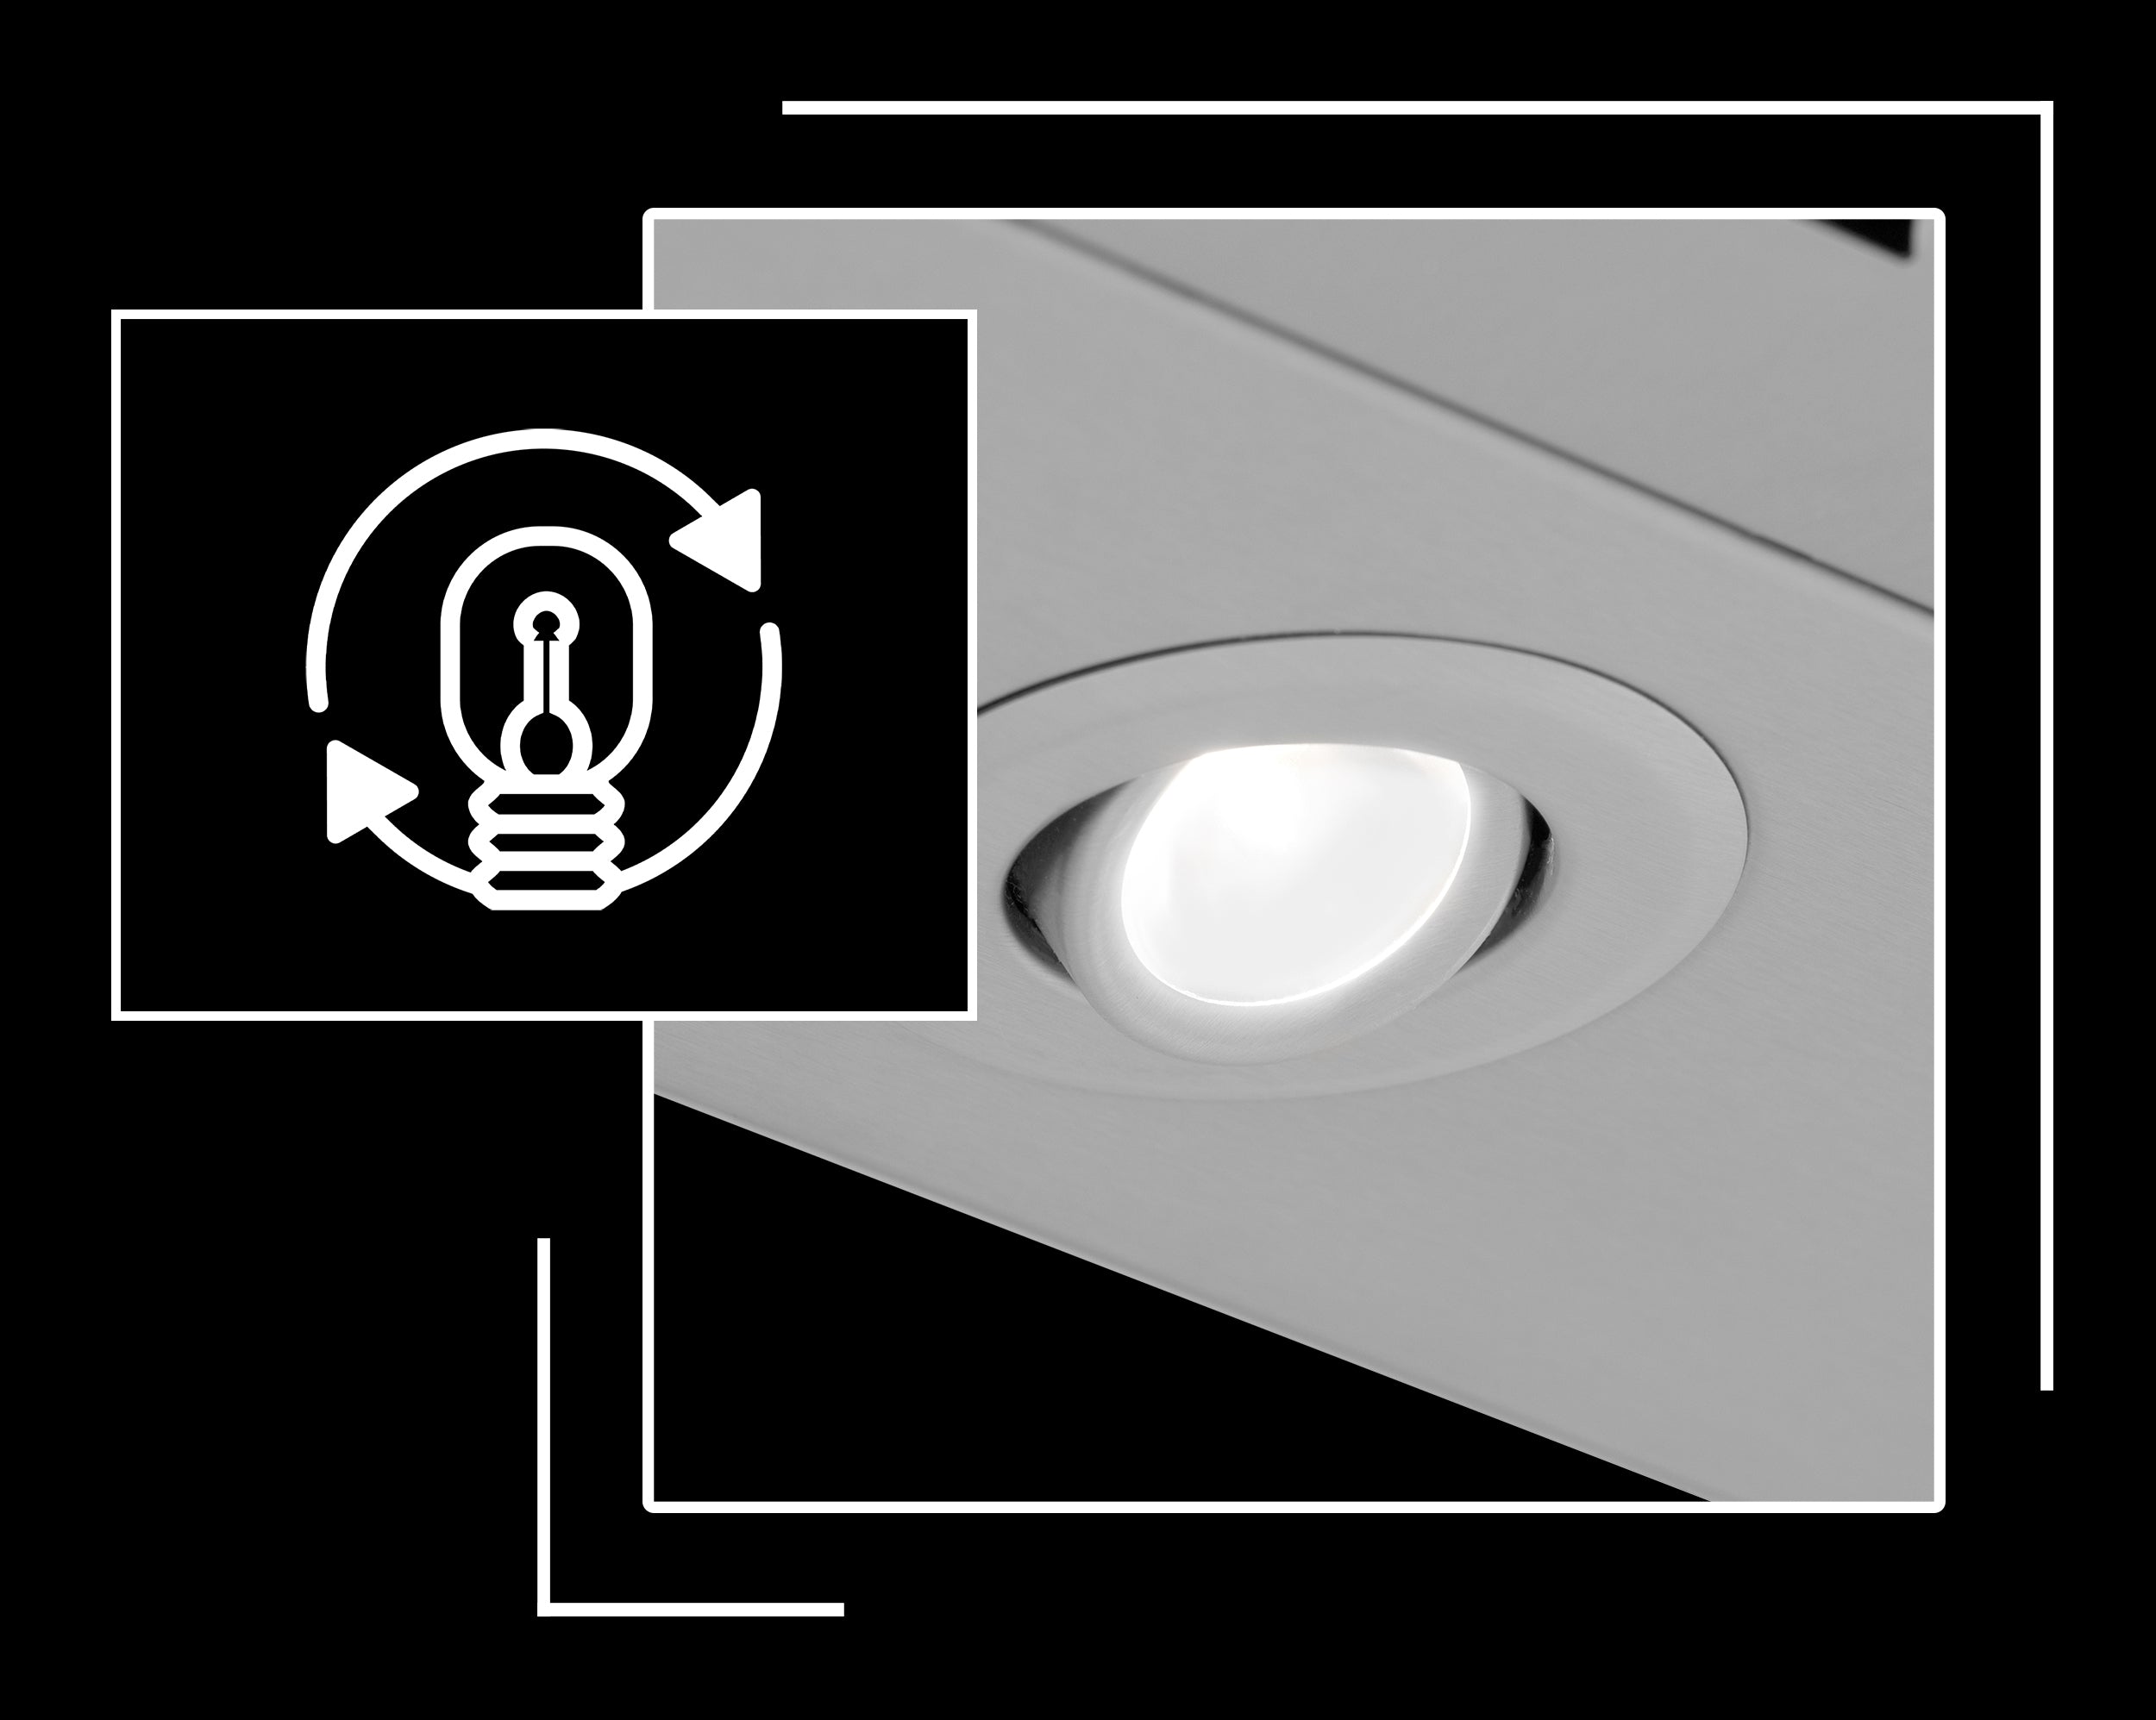 Icon and image representing built-in LED lighting